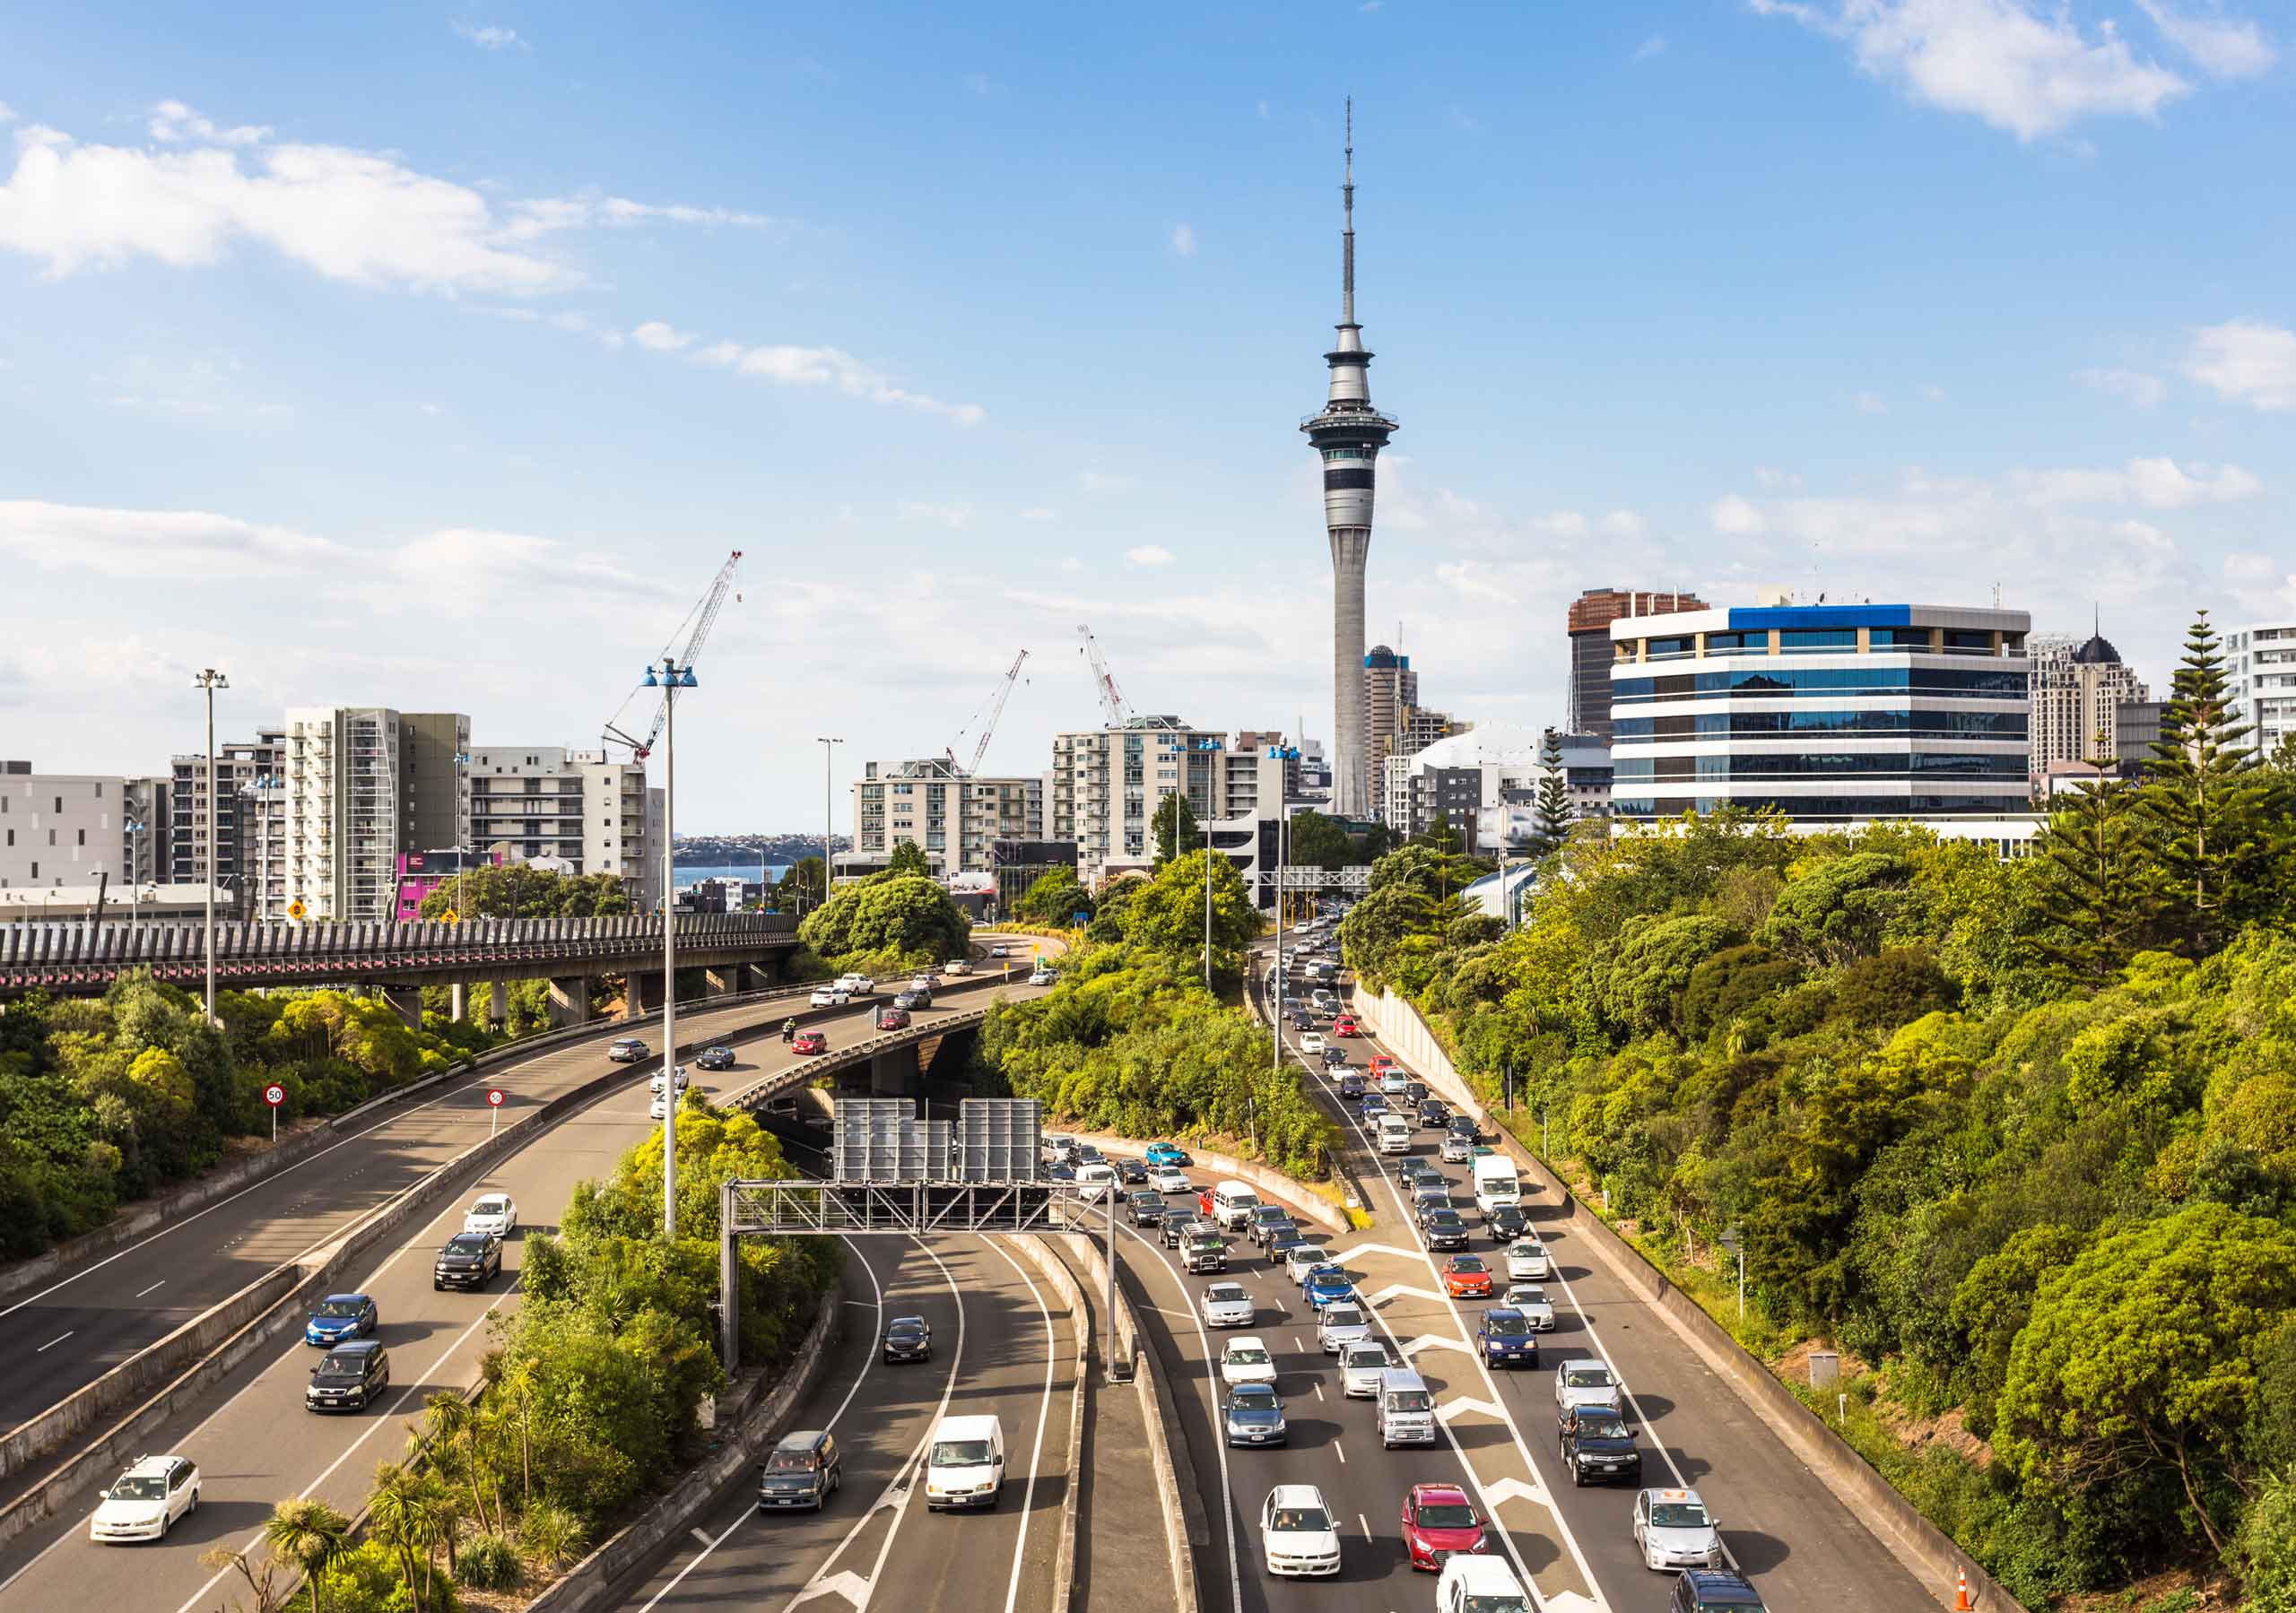 Photo of a traffic jam on the Auckland motorway with the Sky Tower in the background.